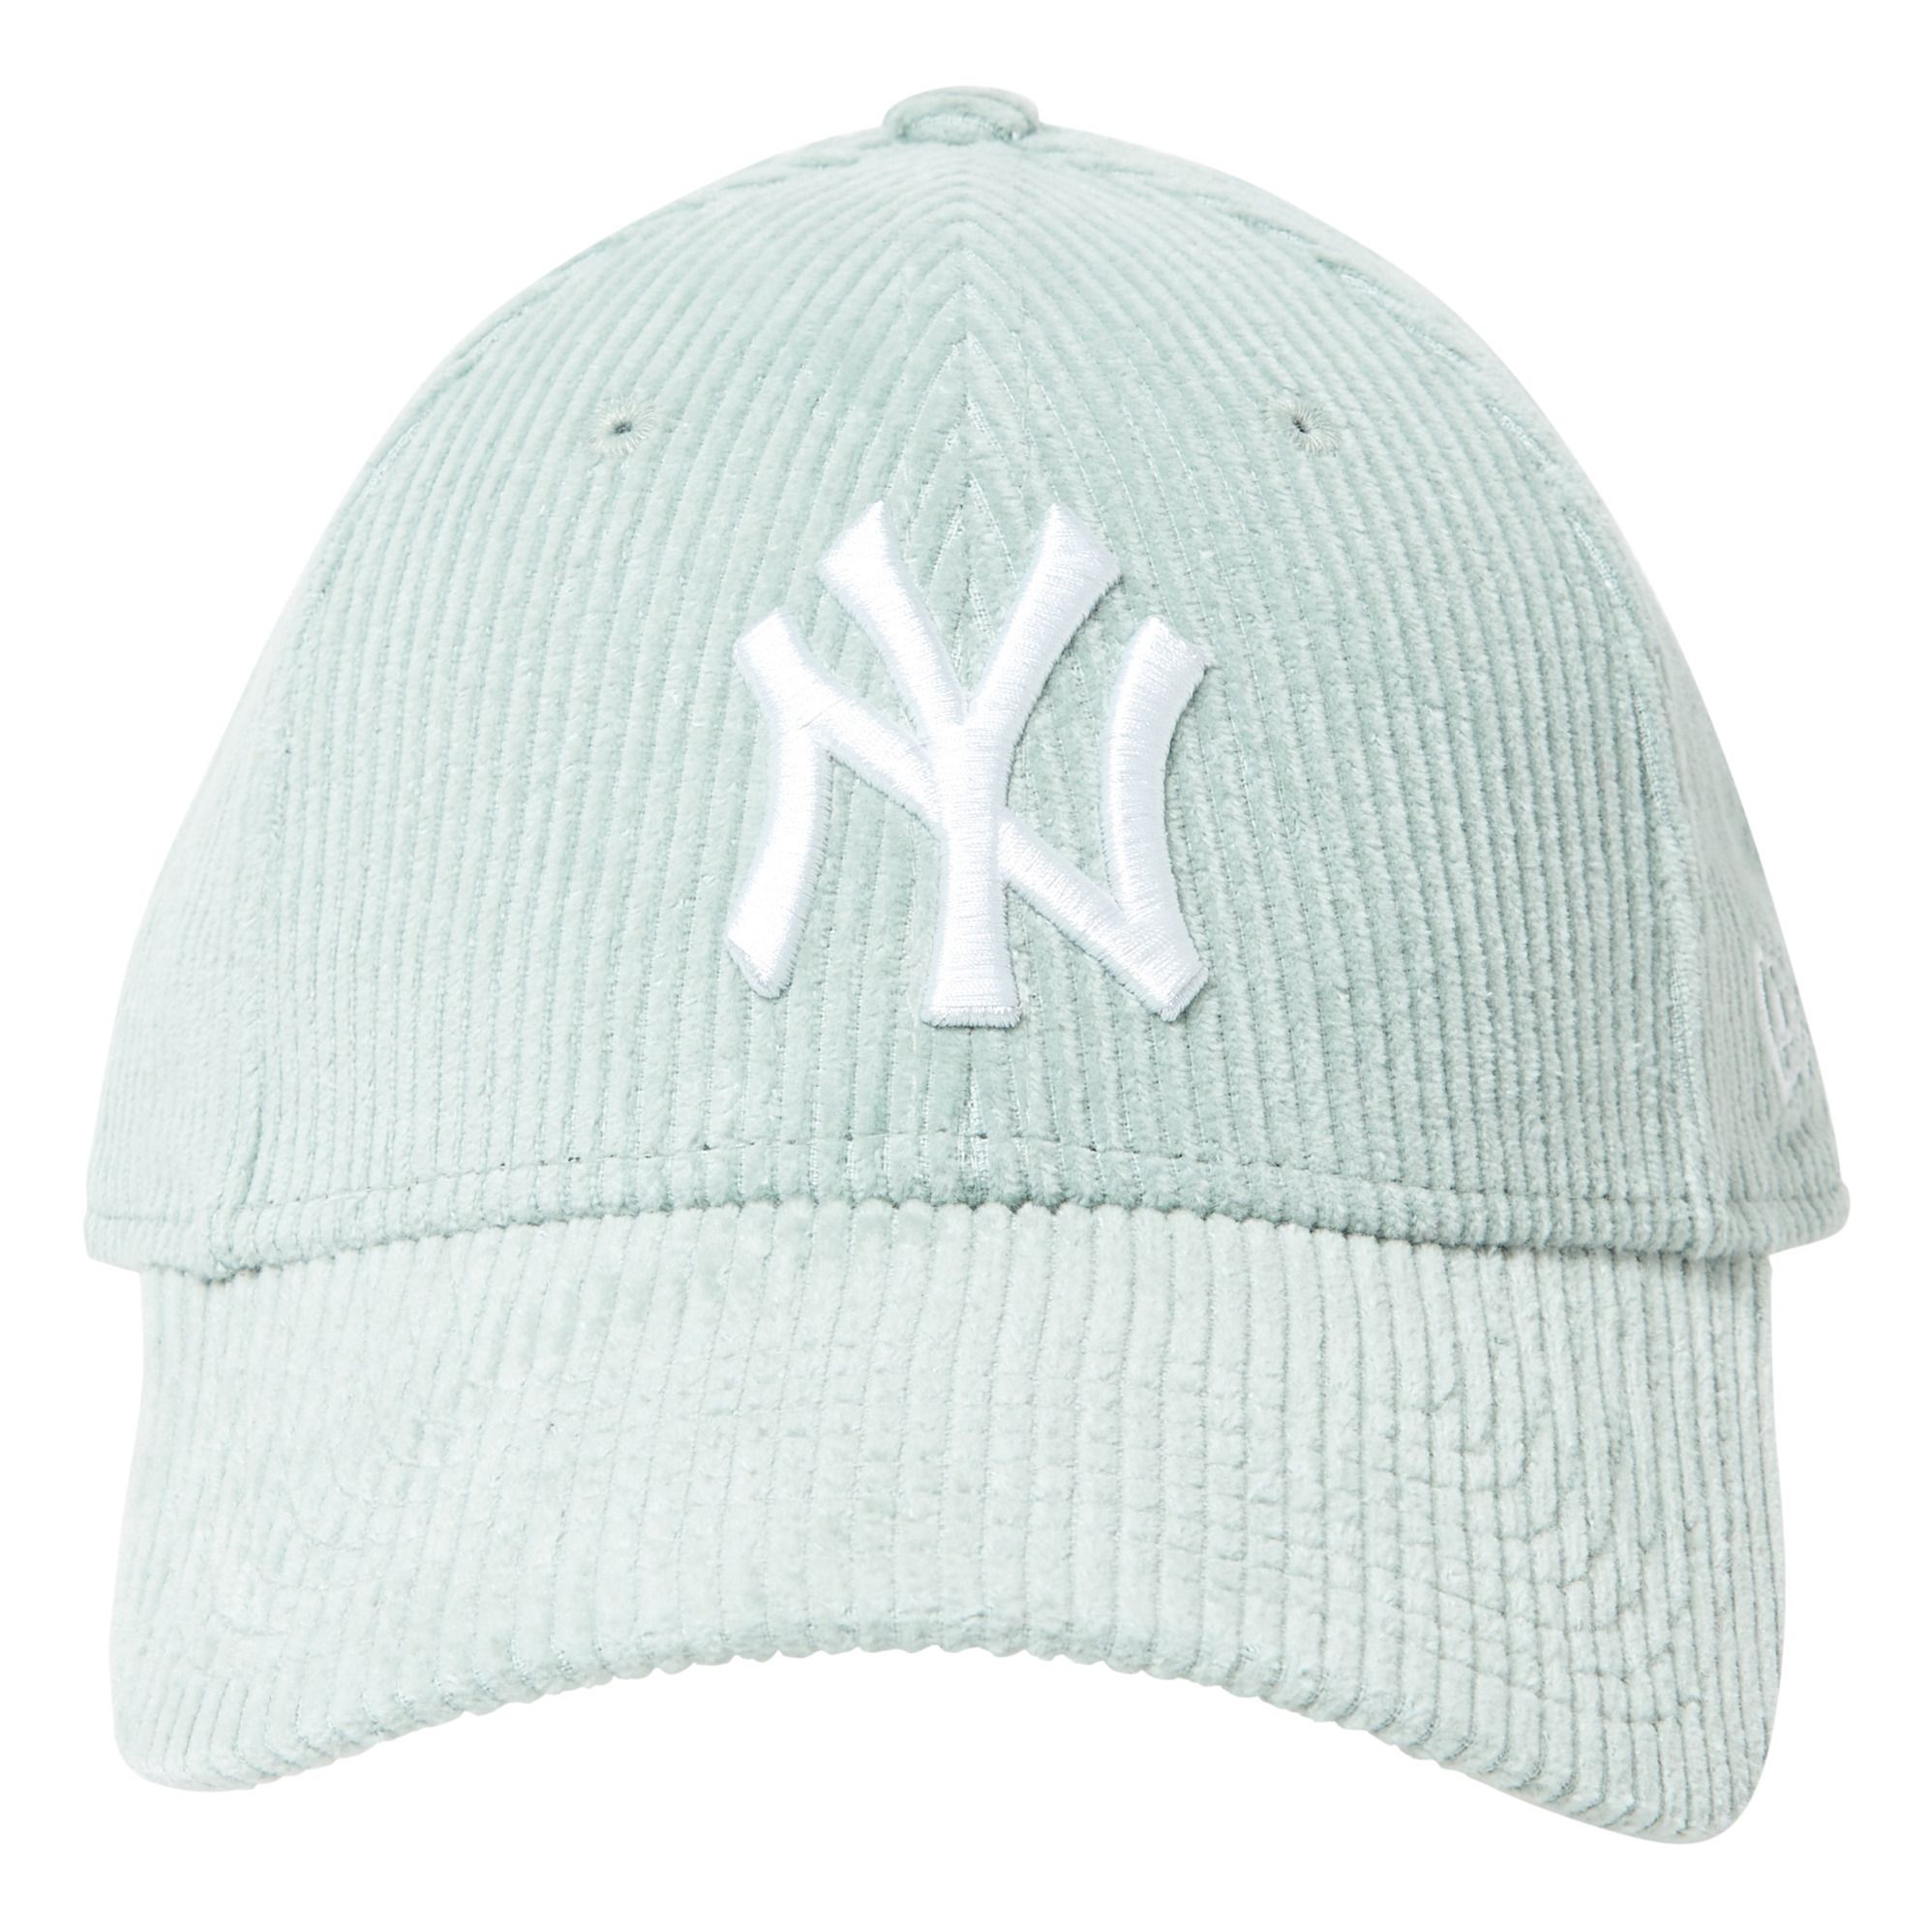 New Era - Casquette 9Forty - Collection Adulte - - Femme - Vert